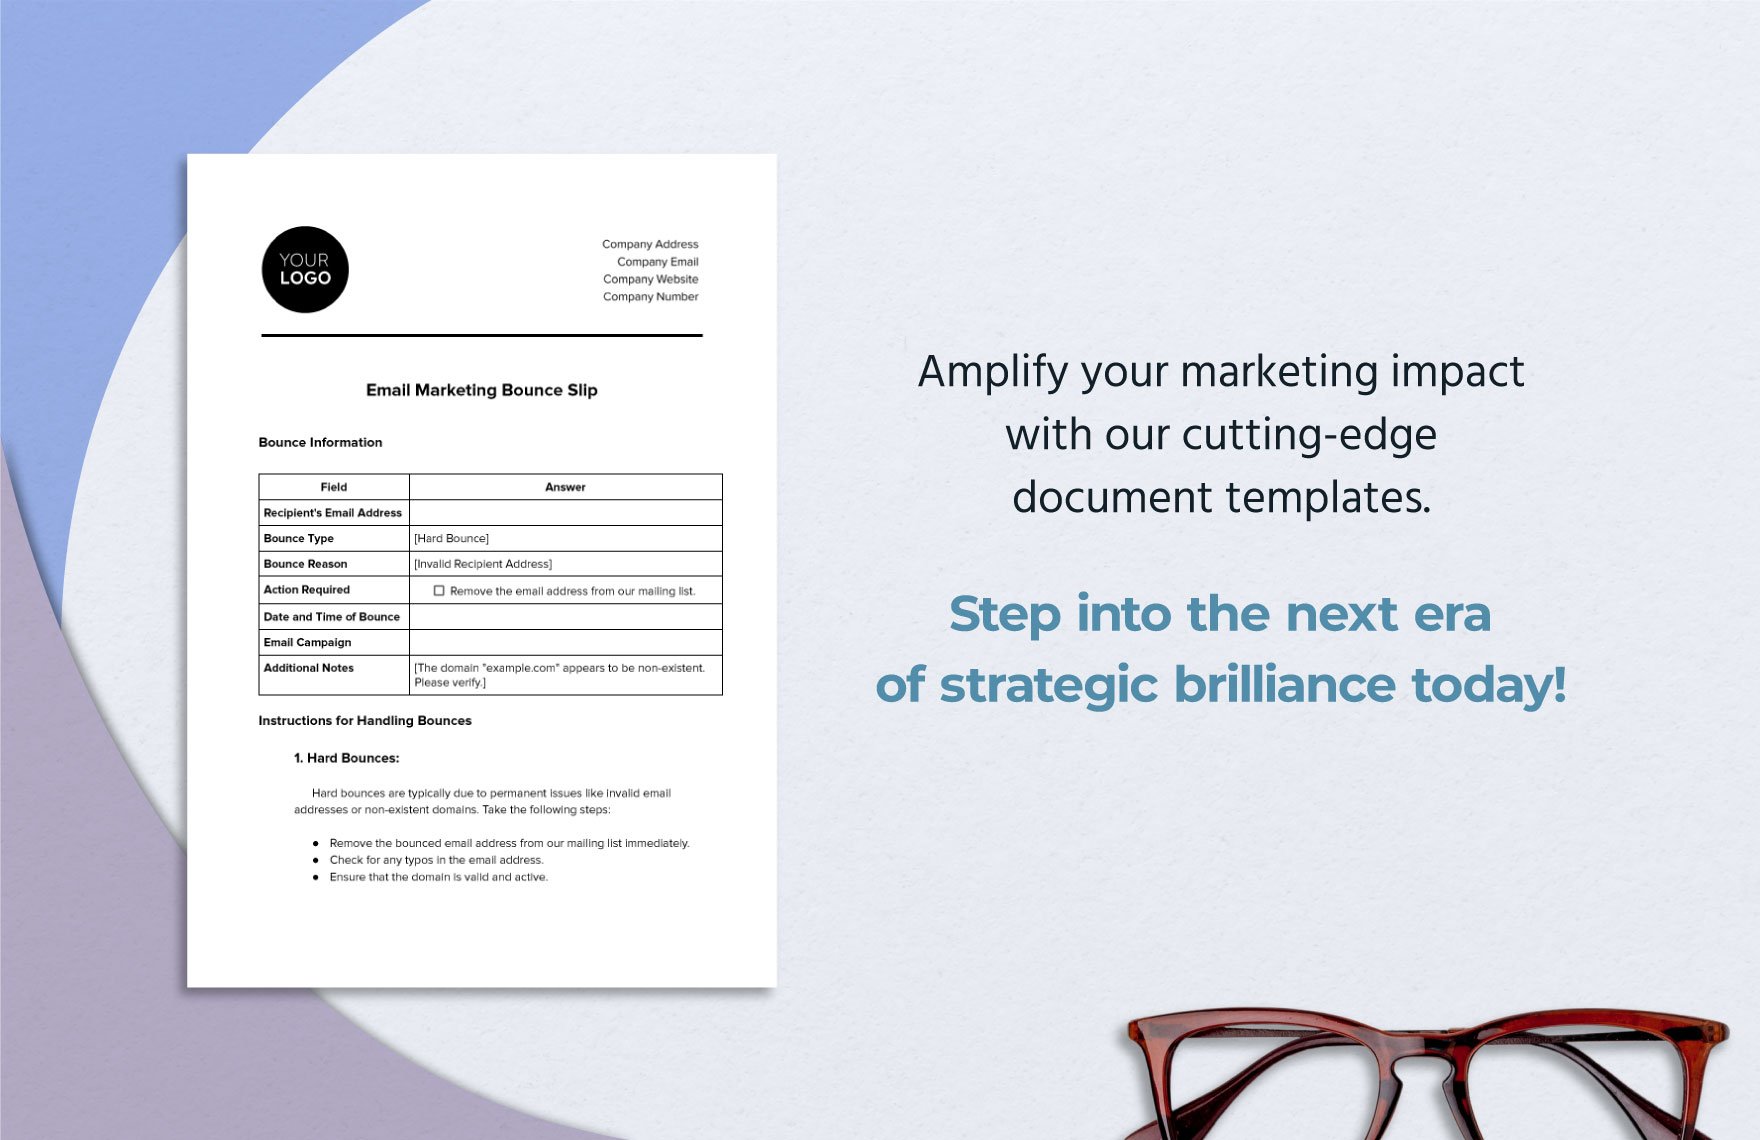 Email Marketing Bounce Slip Template